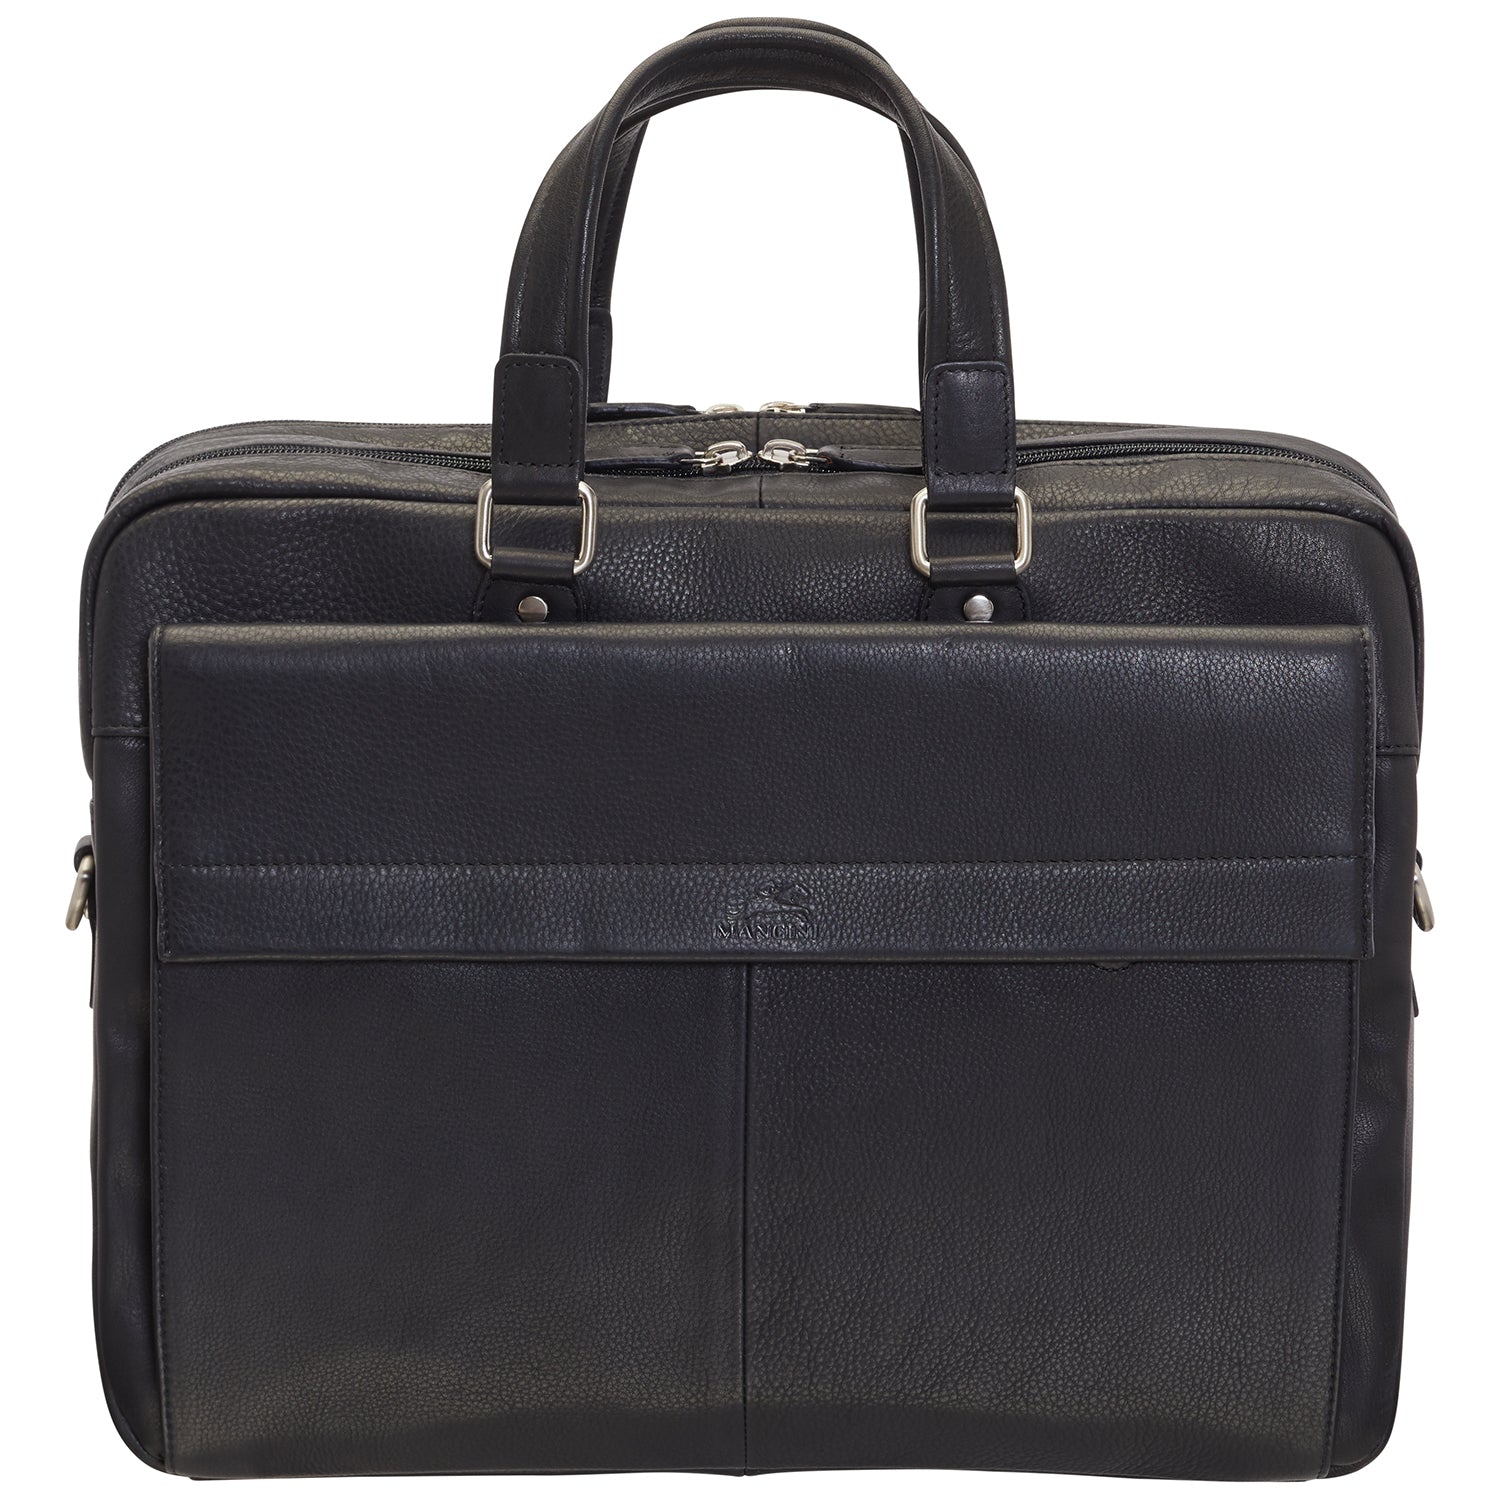 Mancini Leather Double Compartment Briefcase for 15.6" Laptop and Tablet, 16.25" x 4" x 12", Black